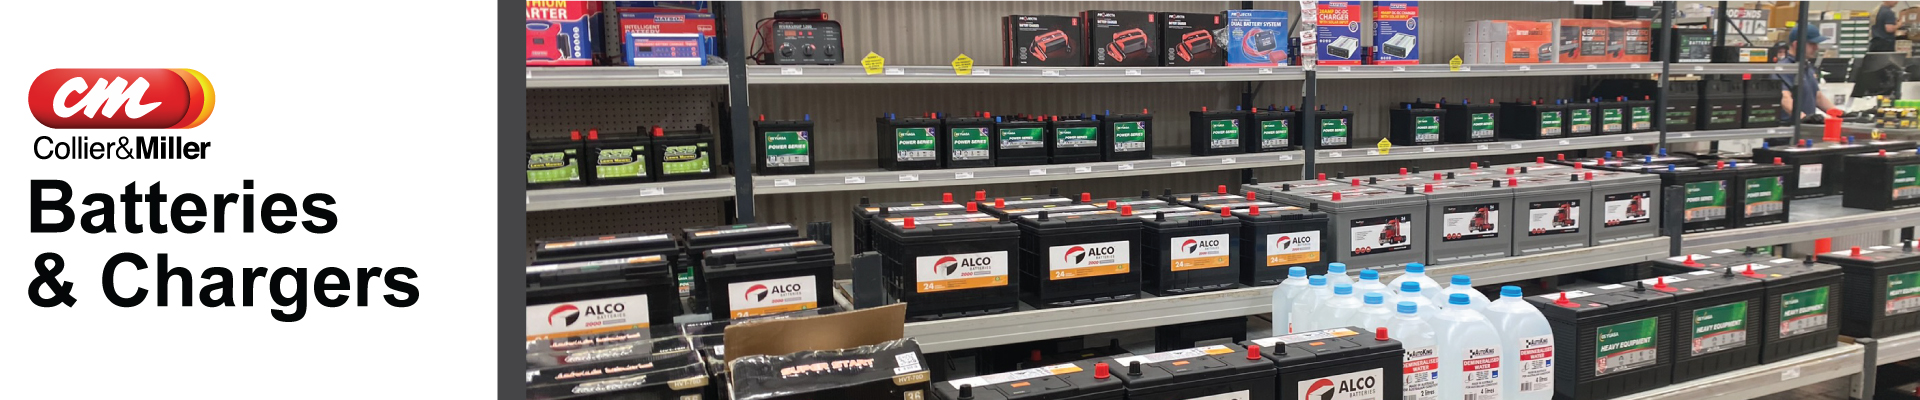 <p>Collier &amp; Miller stocks a wide range of automotive batteries - at super competitive prices.&nbsp;</p>
<p>Find car batteries, truck batteries and tractor batteries plus mobility vehicle batteries, caravan batteries, motorbike batteries and lawnmower batteries. &nbsp;</p>
<p>Collier &amp; Miller&rsquo;s huge range caters to almost all makes and models and includes Lead Acid batteries, Stop-Start batteries, Deep Cycle batteries and Lithium batteries.&nbsp;</p>